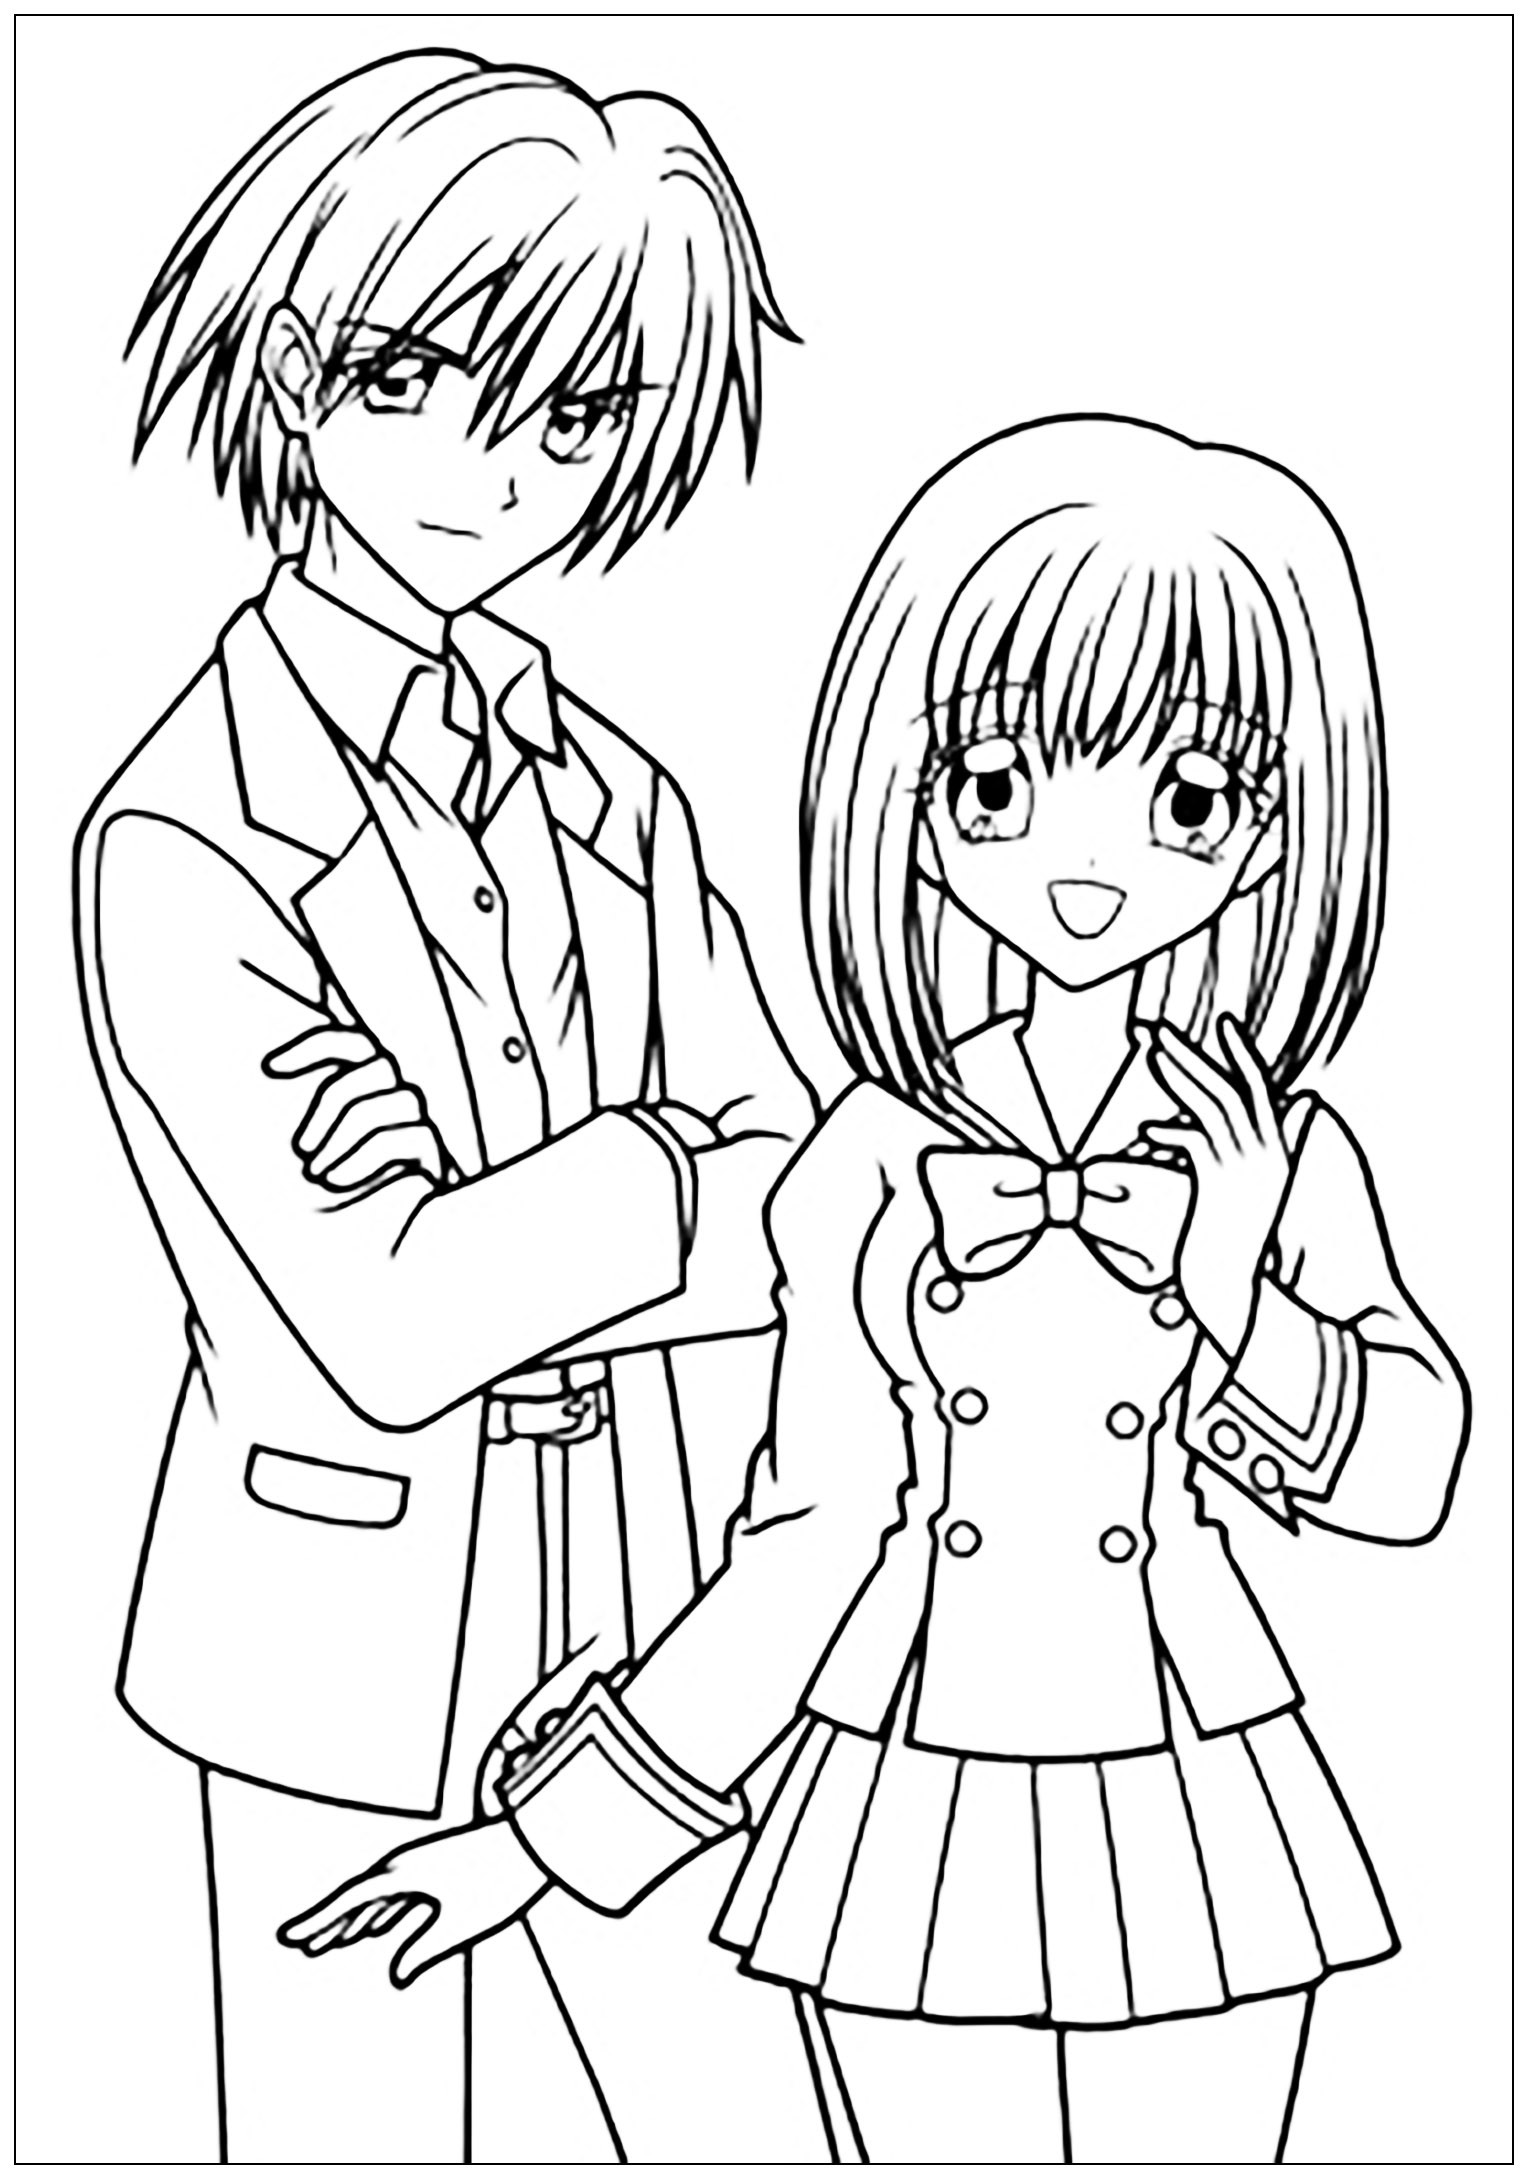 Anime Coloring Pages Boy And Girl
 Manga drawing boy and girl in school suit Manga Anime